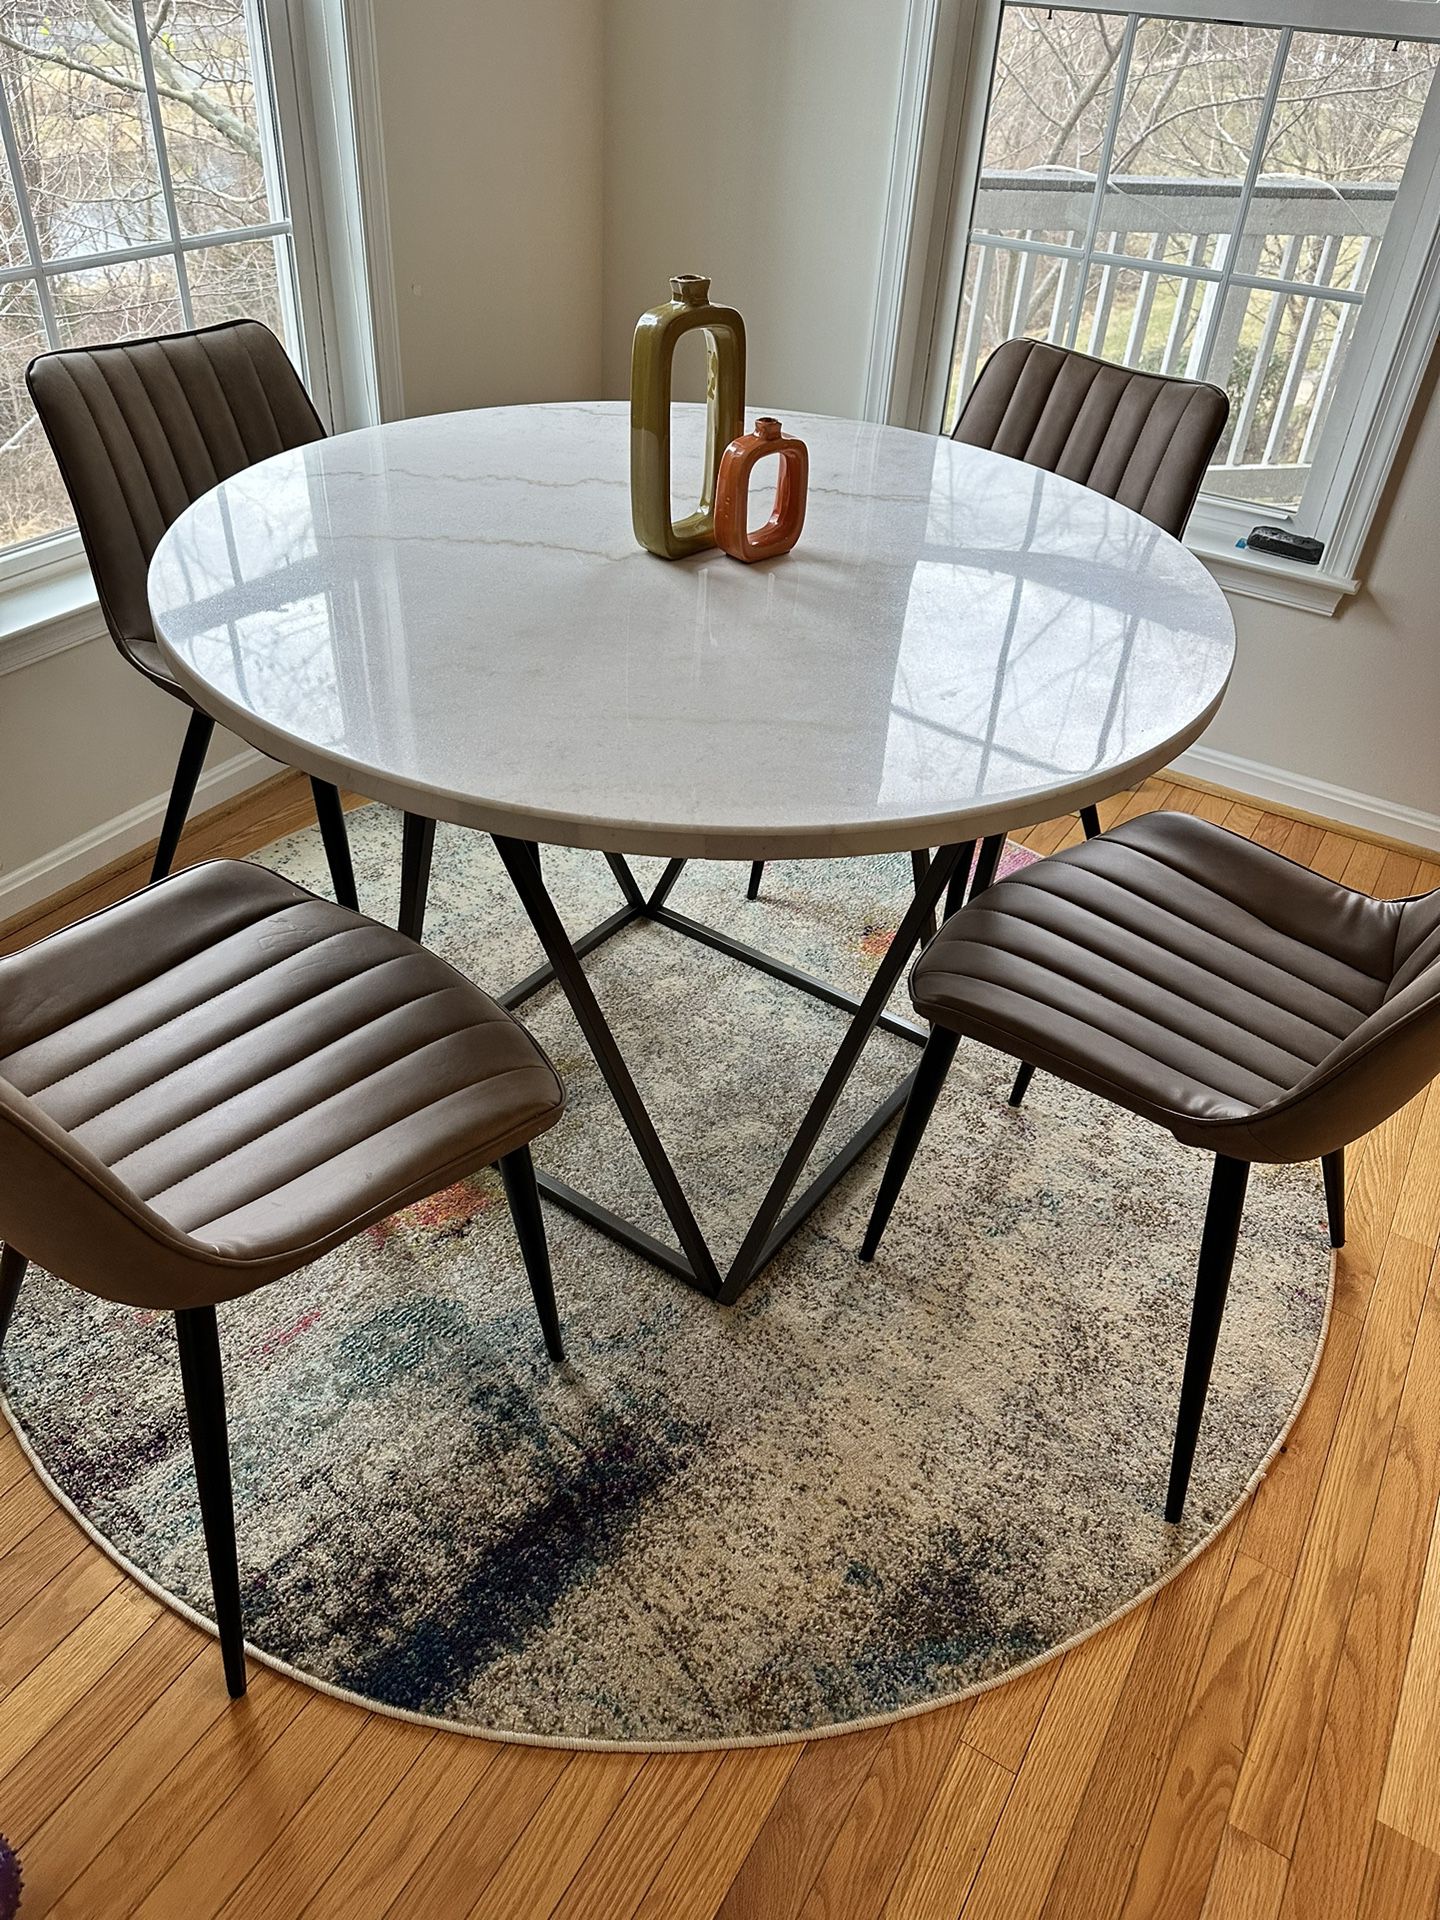 Marble Round Dining Table 4 Chairs